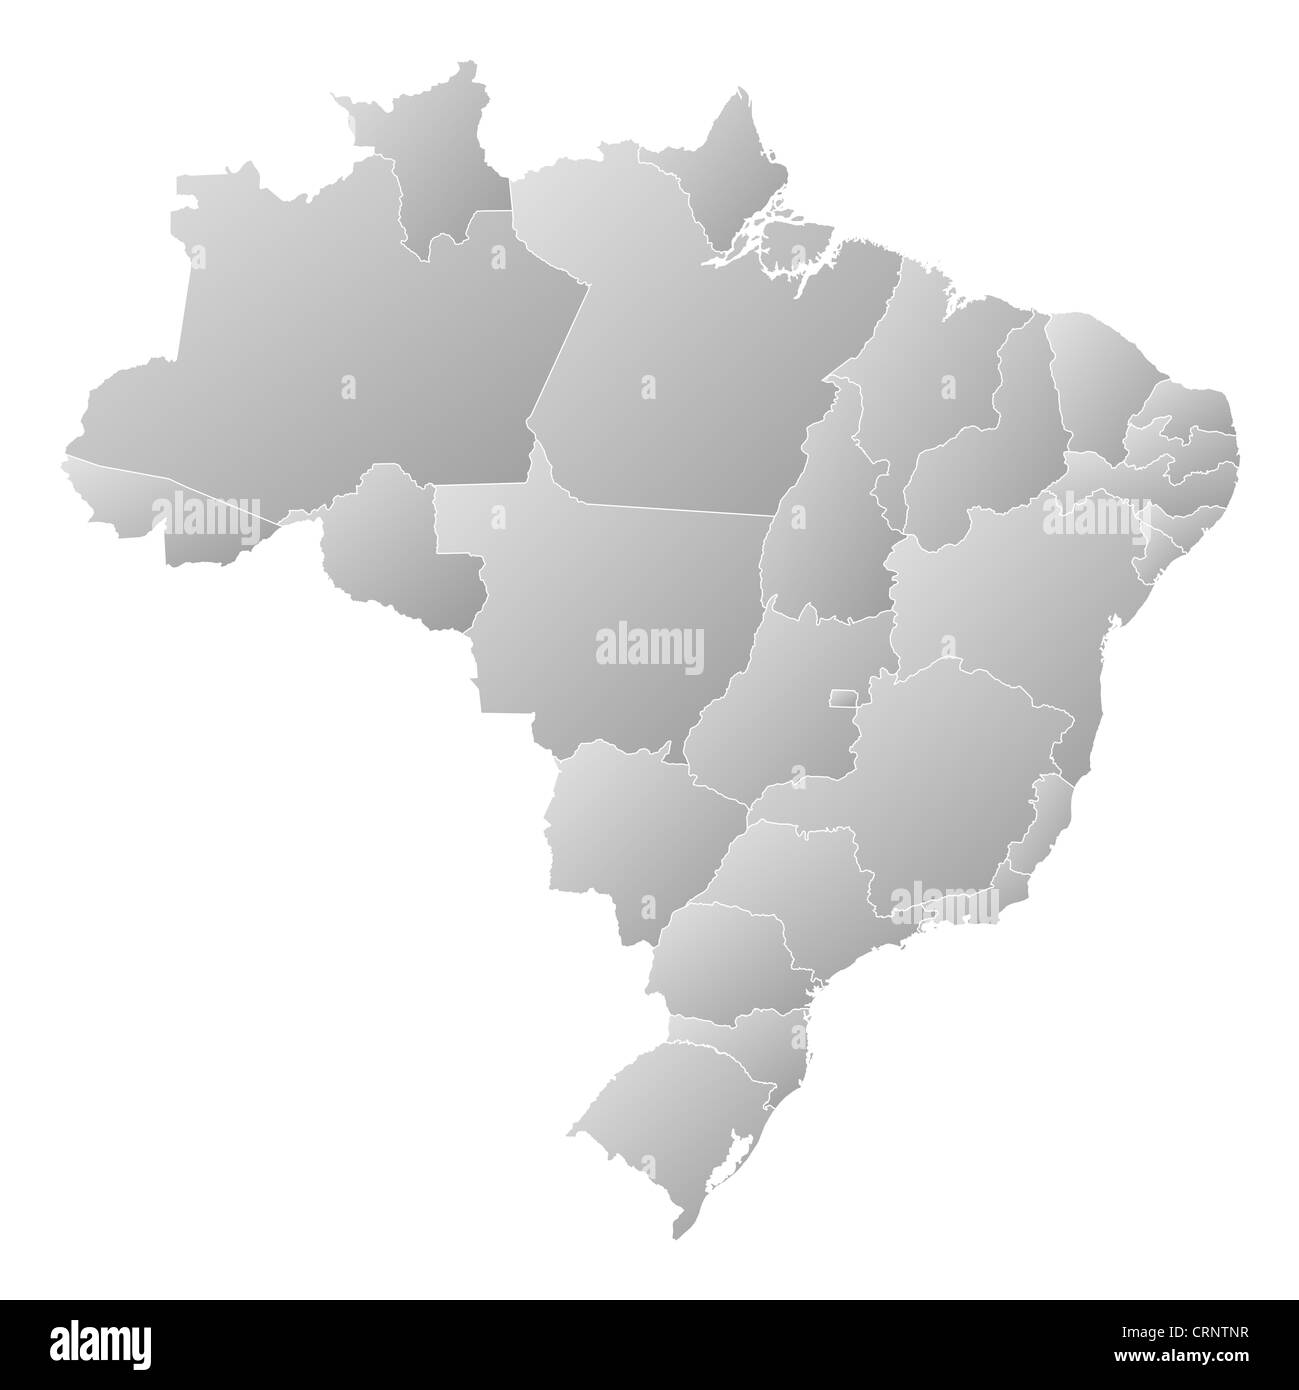 Political map of Brazil with the several states. Stock Photo